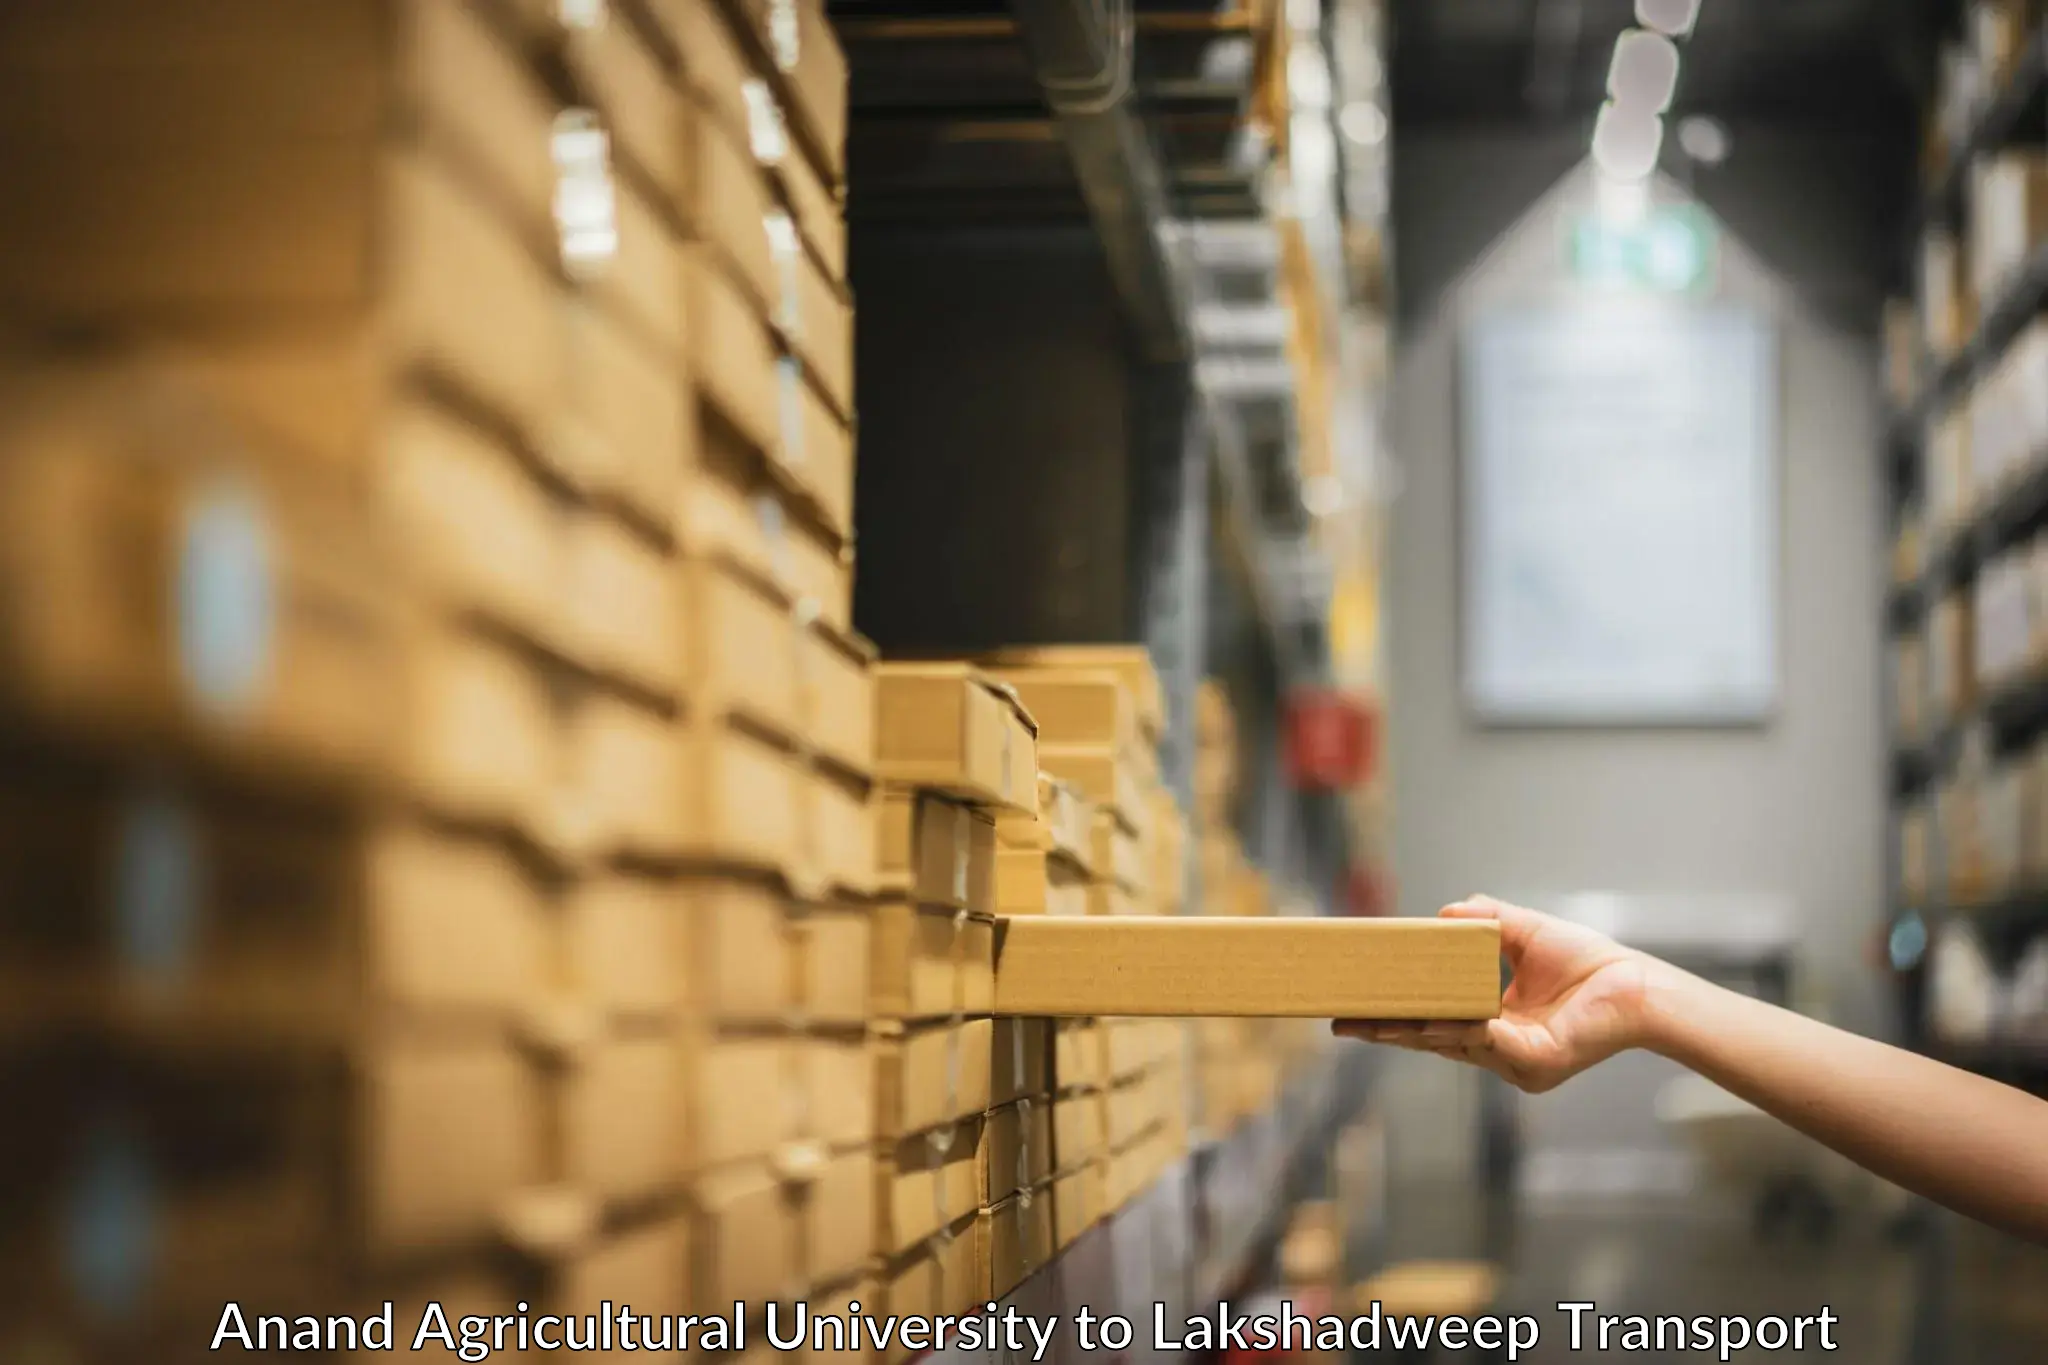 Air cargo transport services Anand Agricultural University to Lakshadweep